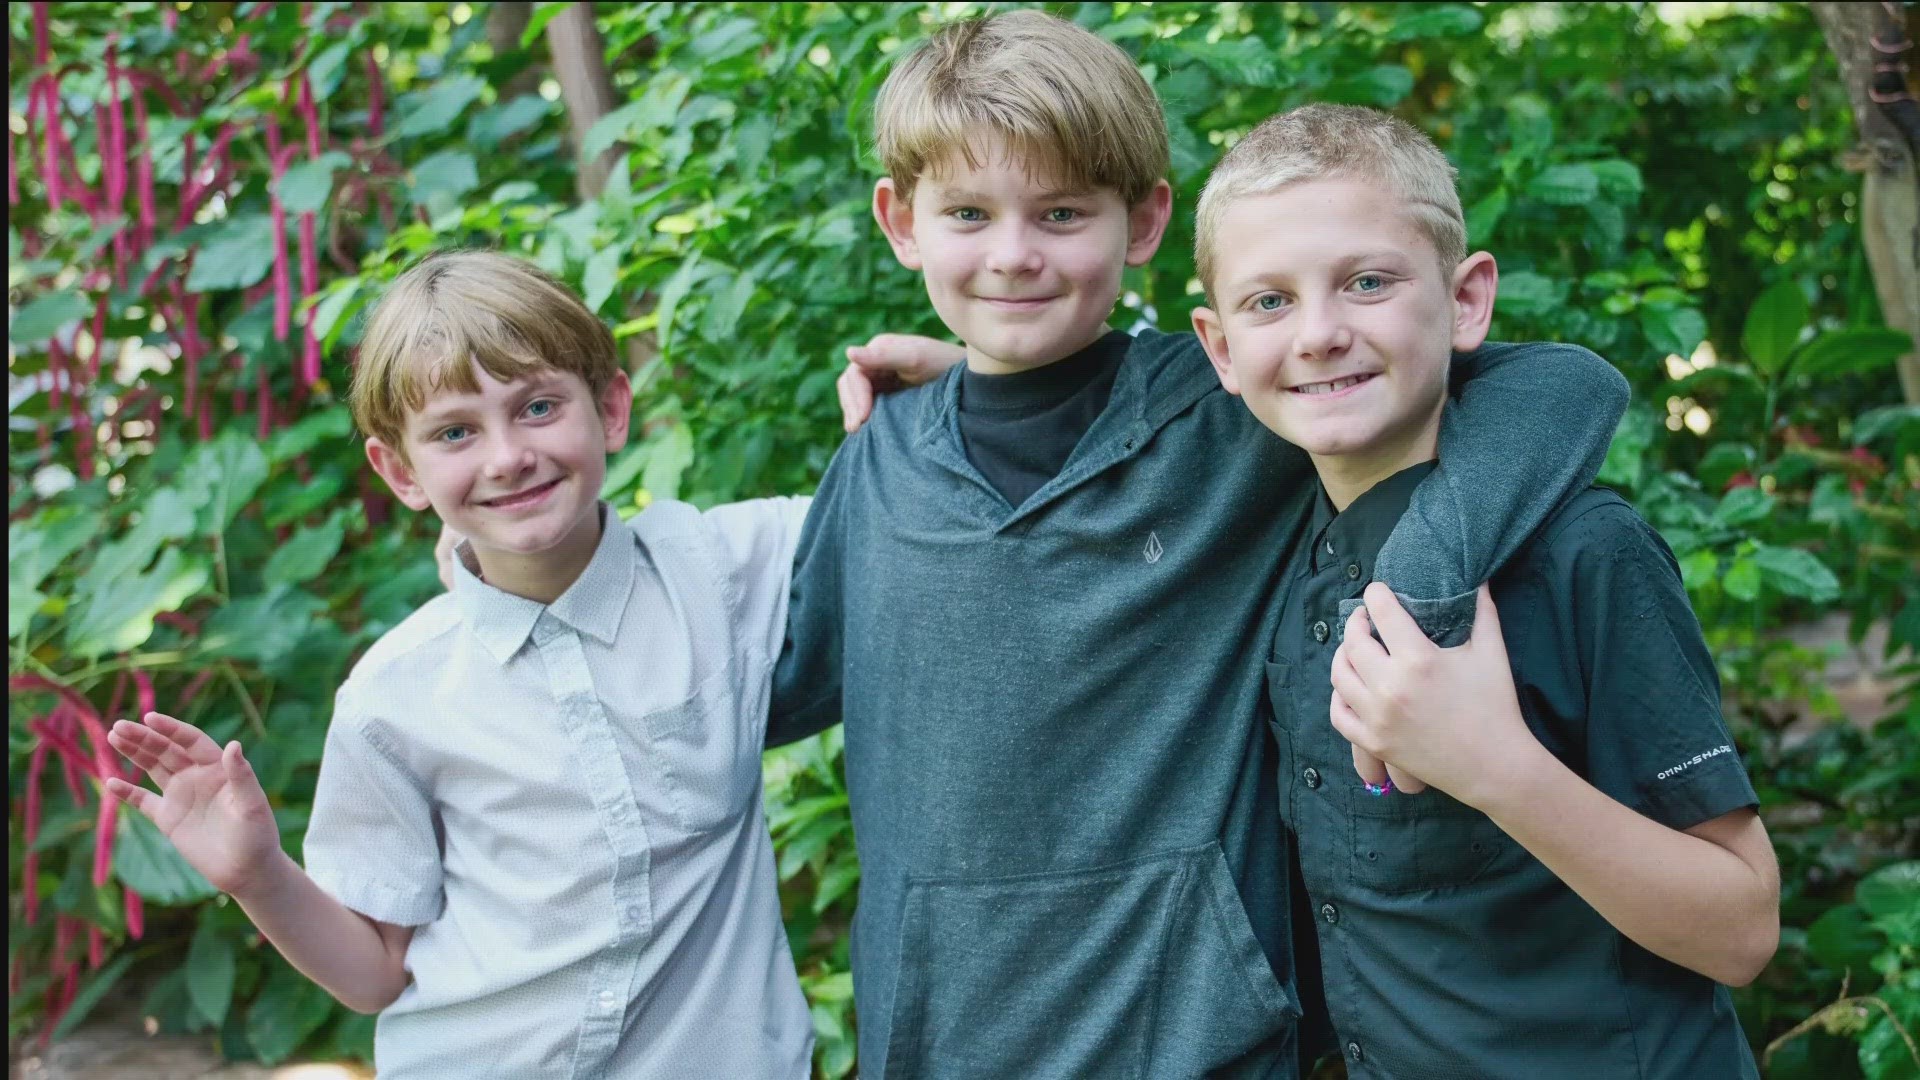 We're checking back in on three brothers who have been featured for Forever Families in the past. Their caseworker said he's determined to find the right for trio.